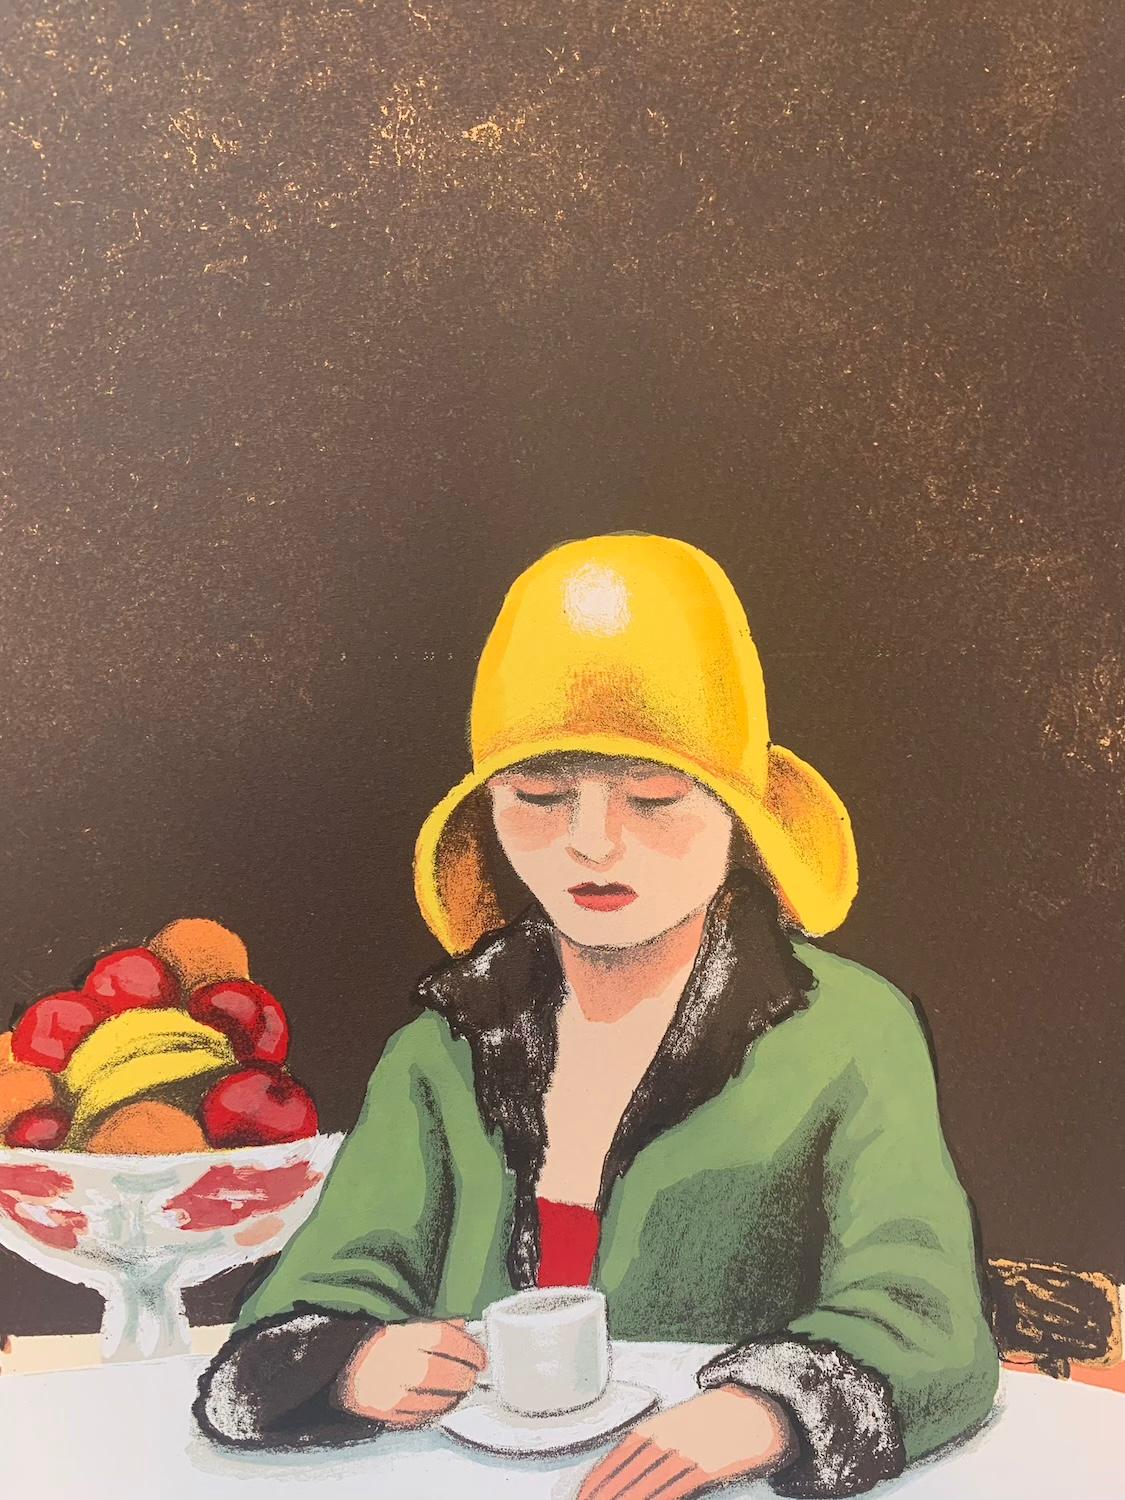 Limited edition print of a woman having a coffee in a cafe while her dog sits with her.
Buy Mychael Barratt printmaker works with Wychwood Art gallery online. Mychael Barratt was born in Toronto, Canada, however, considers himself to be a Londoner